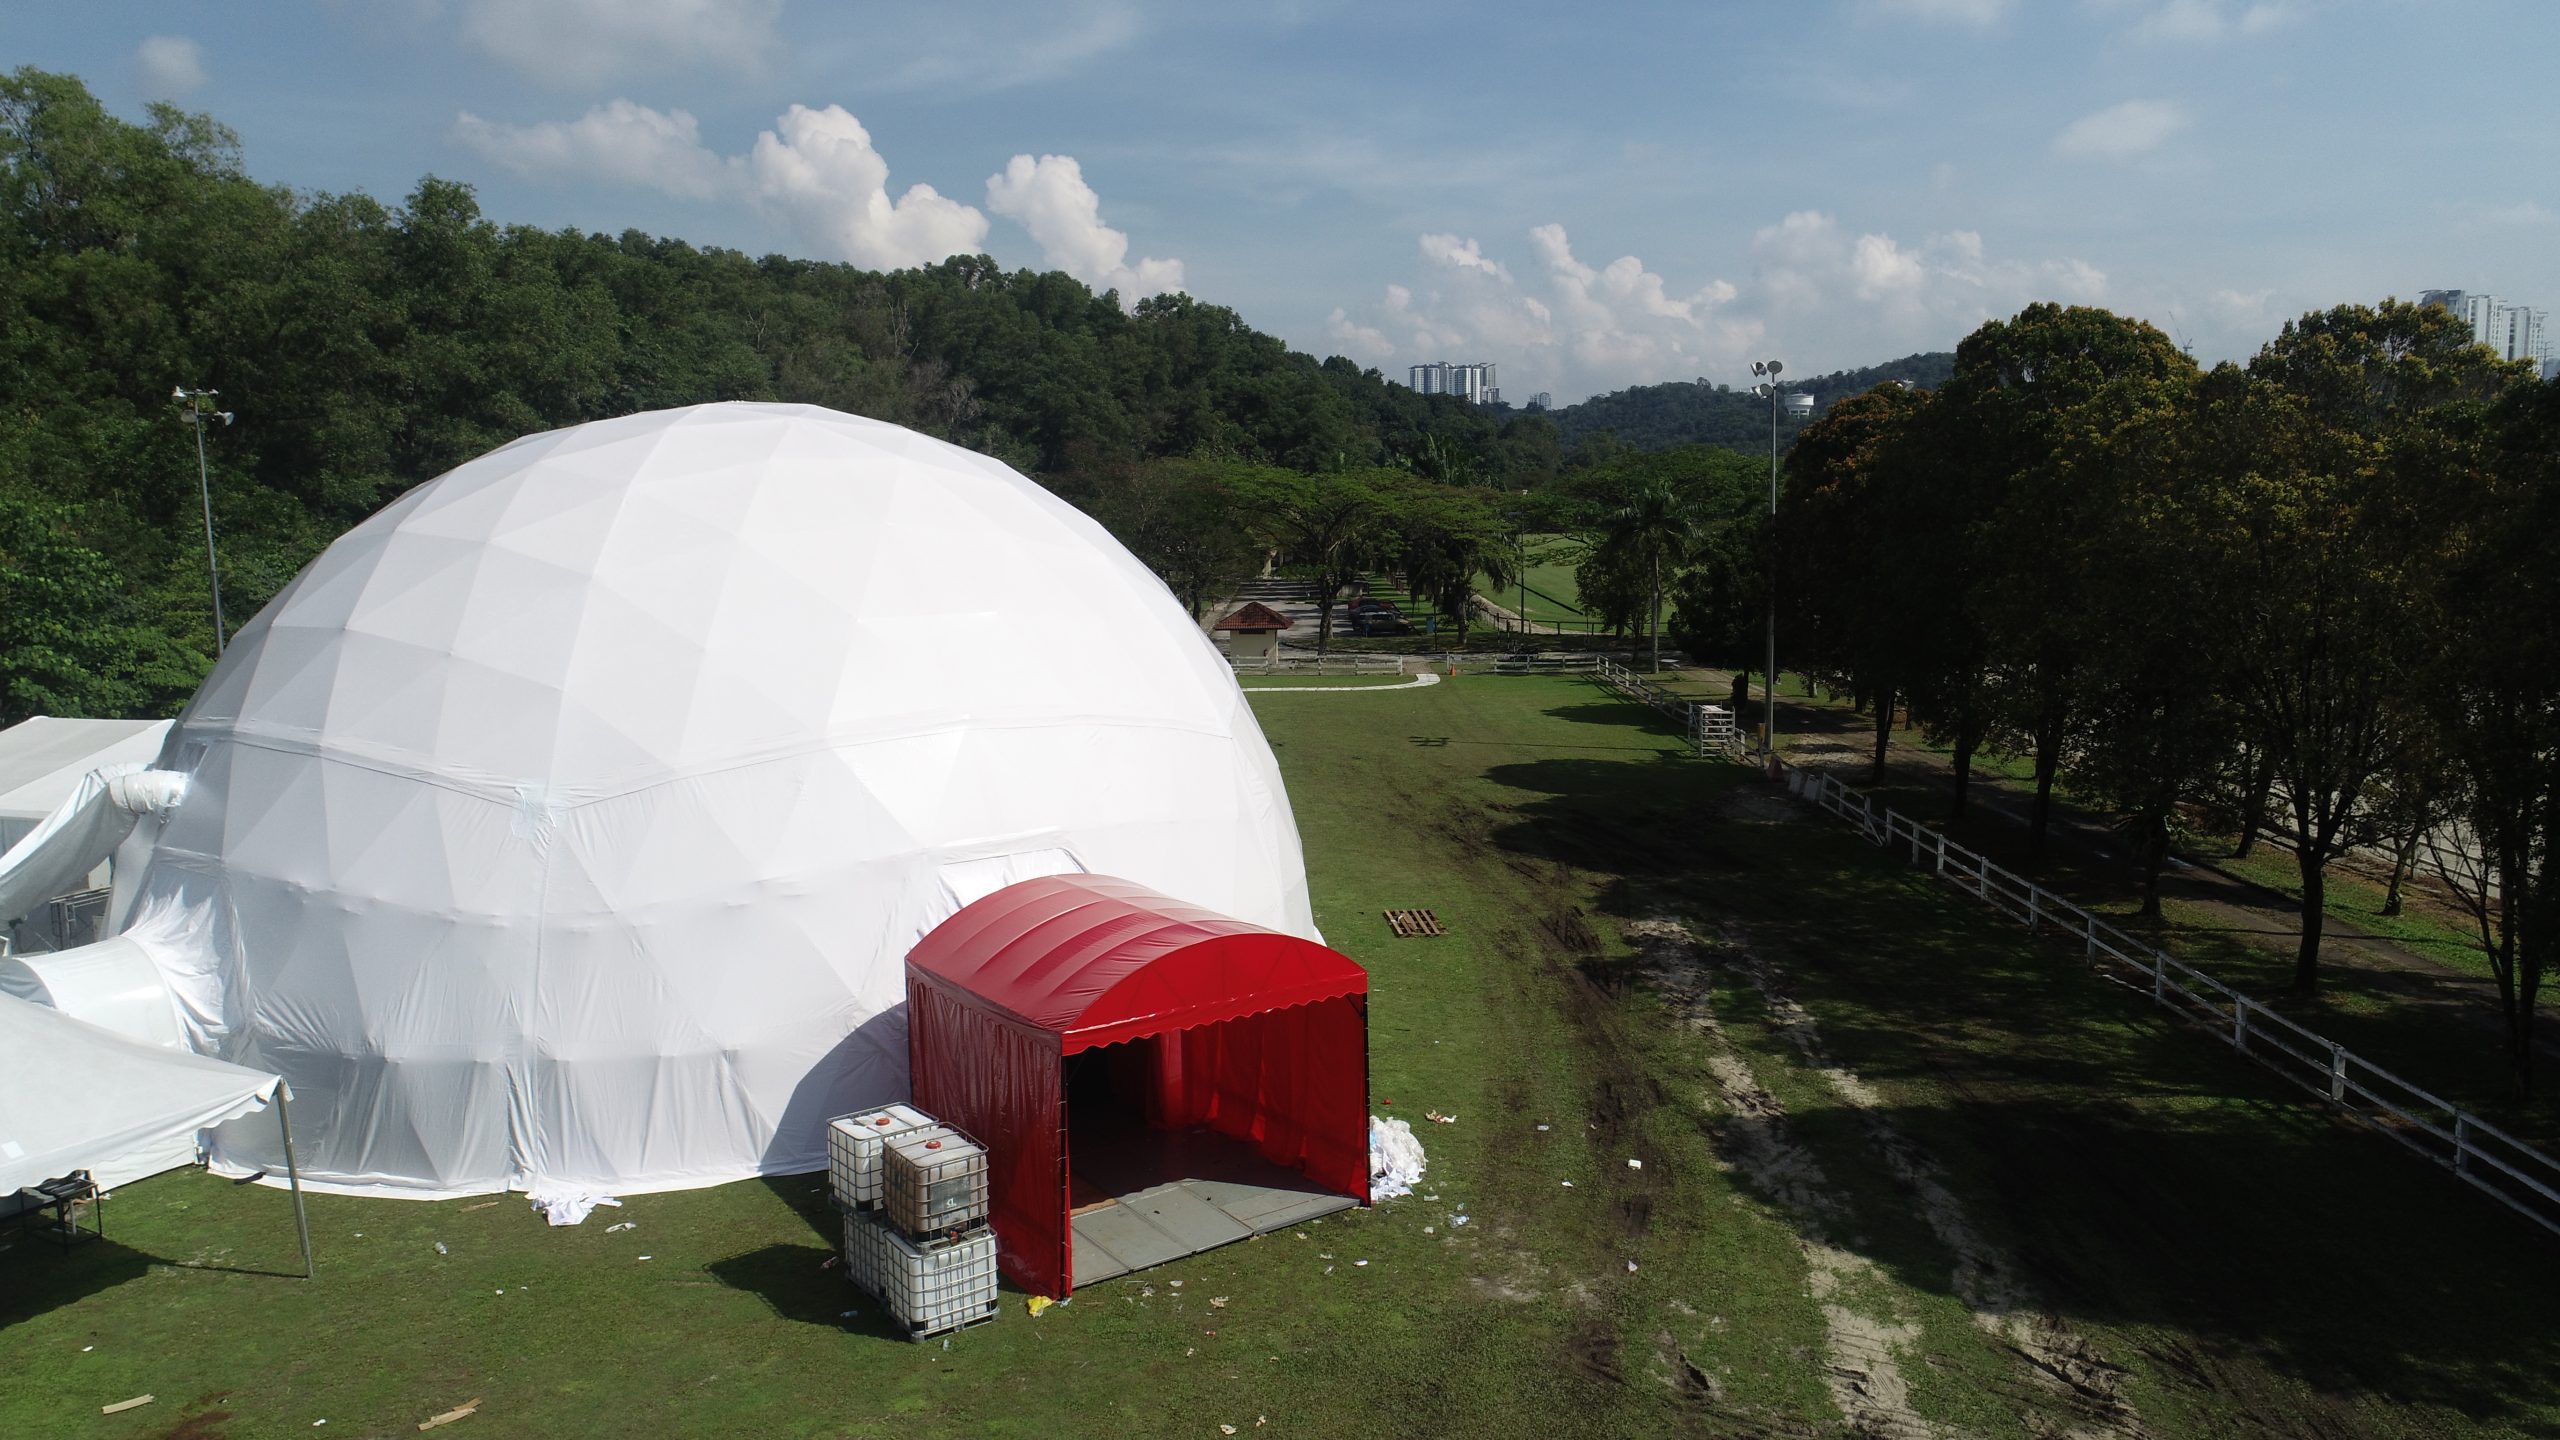 Chivas Regal “Success Is A Blend” Launch Event Geodesic Dome Tent with customised red entrance